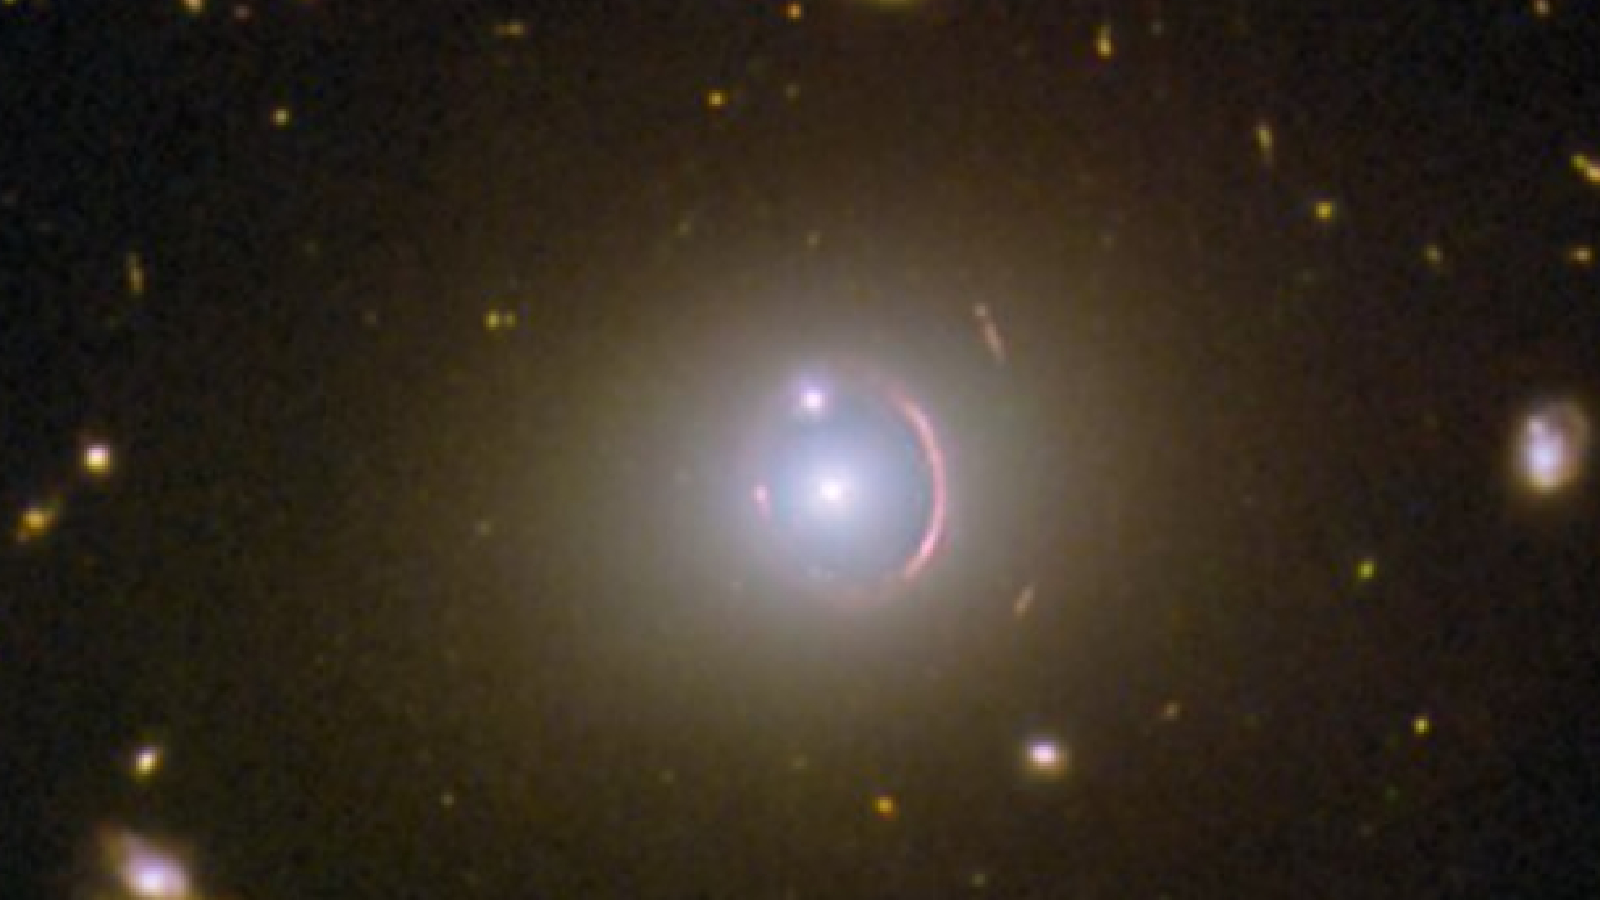 A ring of light with a bright galaxy at its center and another galaxy aligned with the ring like an engagement ring